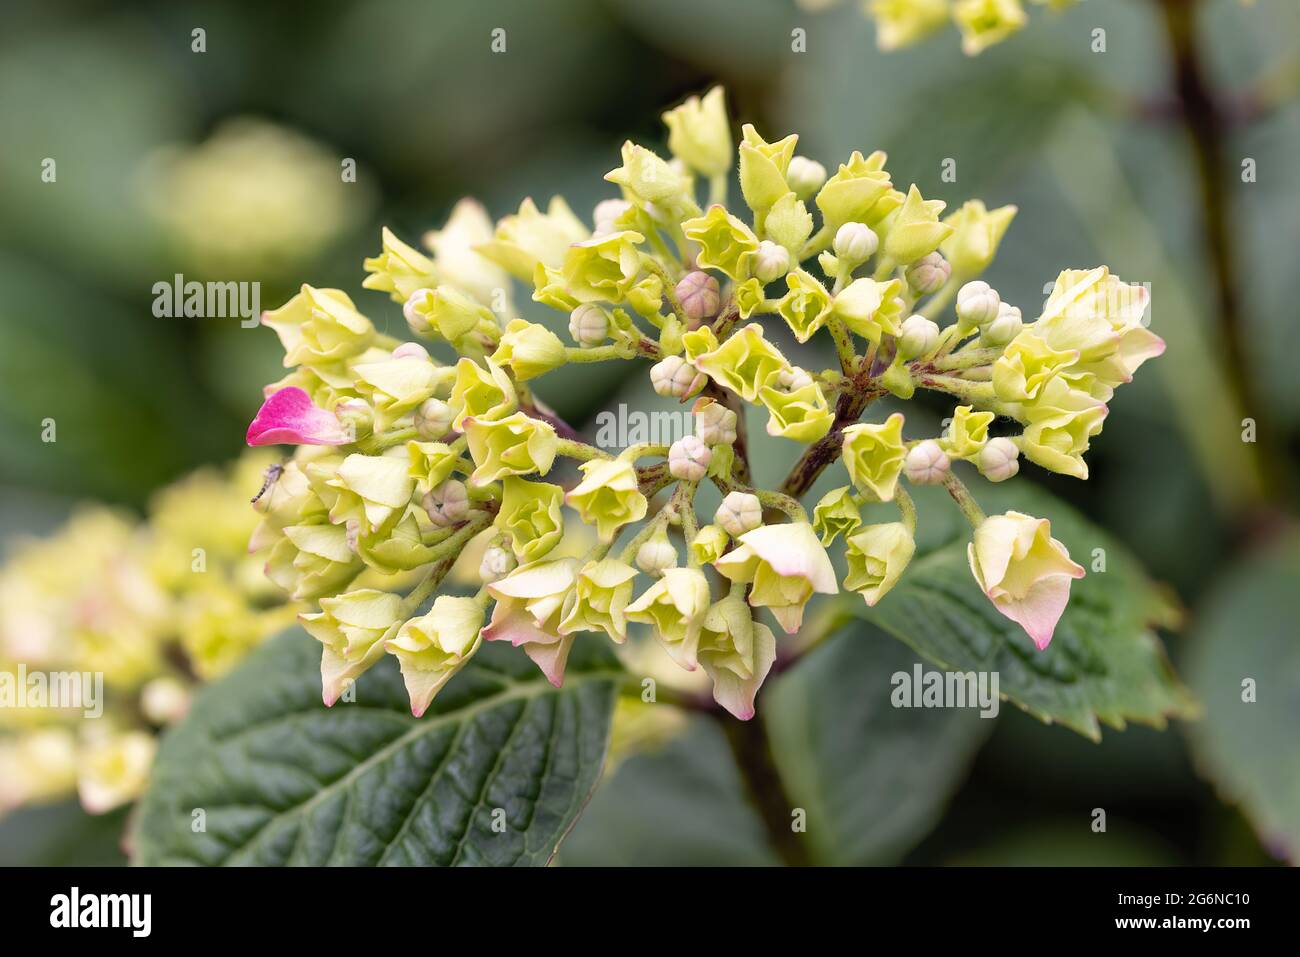 Focus stack detail of Hortensia flower with blurred background Stock Photo